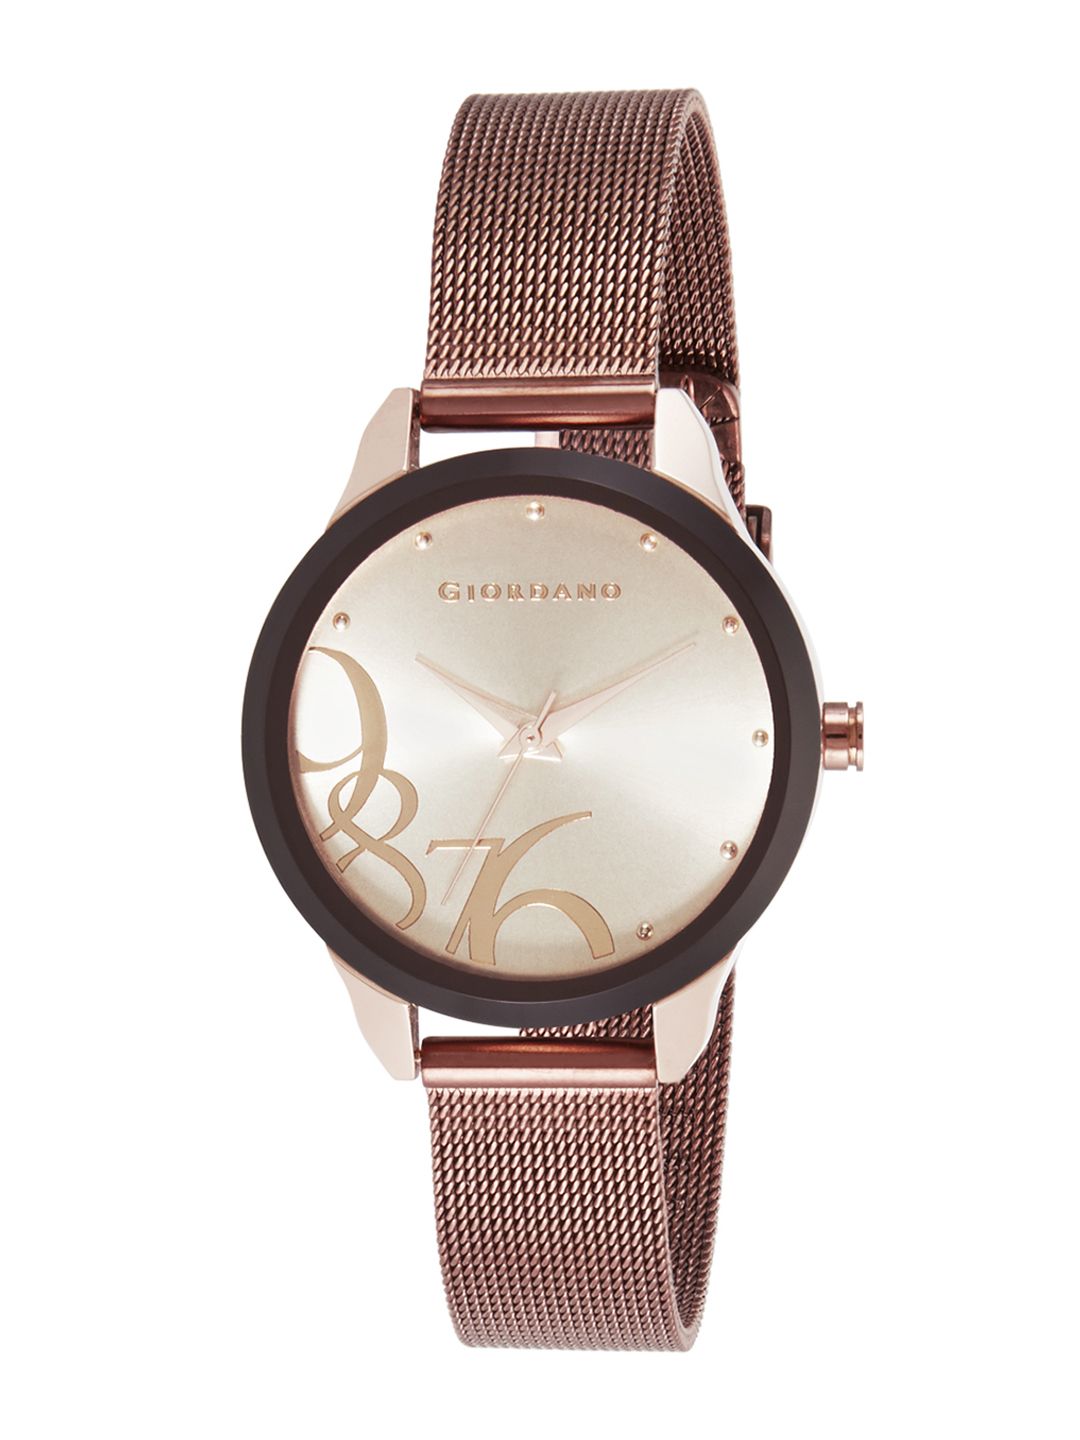 GIORDANO Women Gold-Toned Analogue Watch GD-4008-33 Price in India